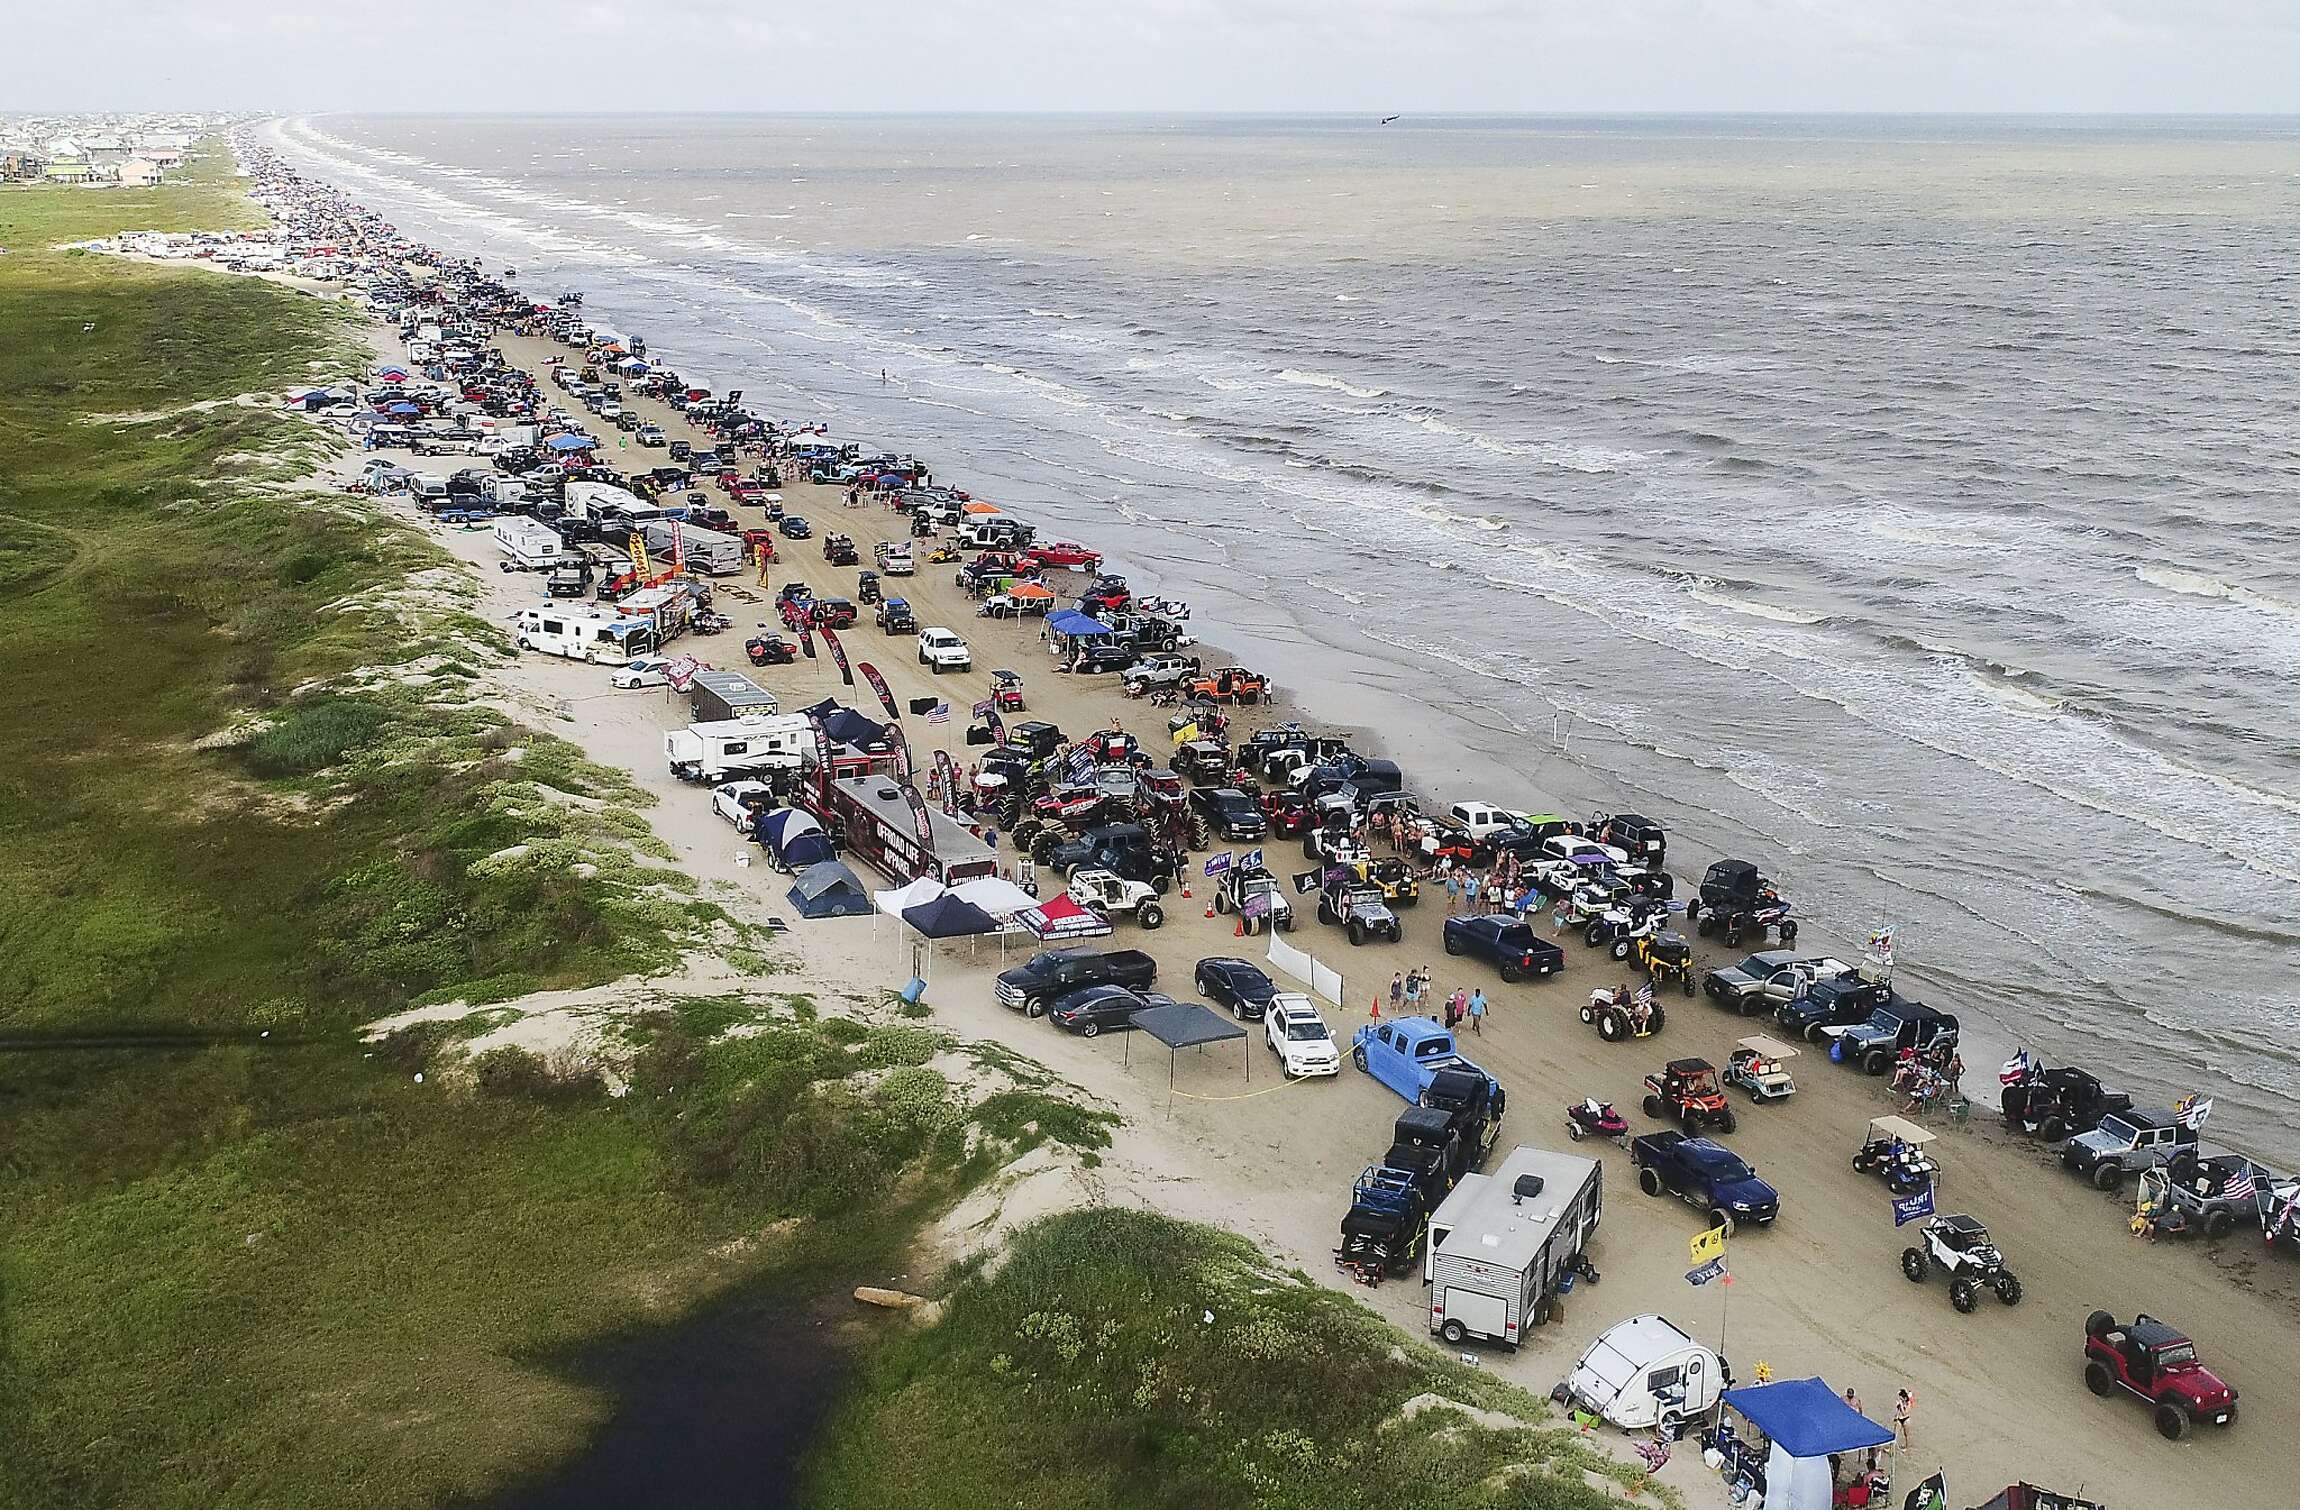 Jeep Weekend is the most popular event in Bolivar Peninsular